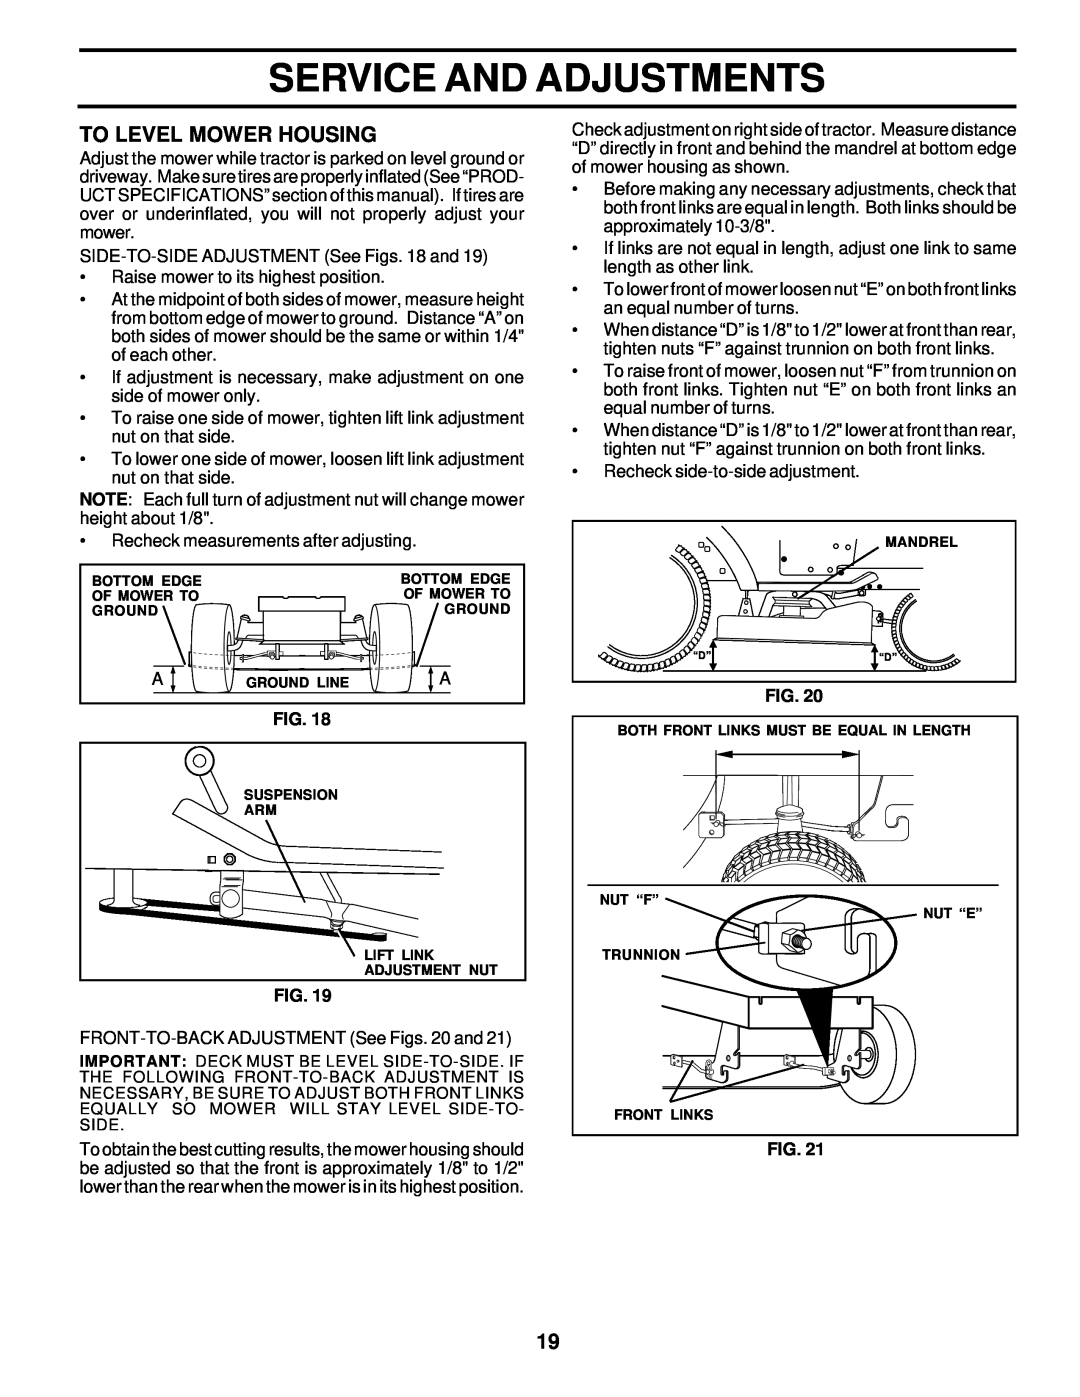 Poulan 177545 owner manual To Level Mower Housing, Service And Adjustments 